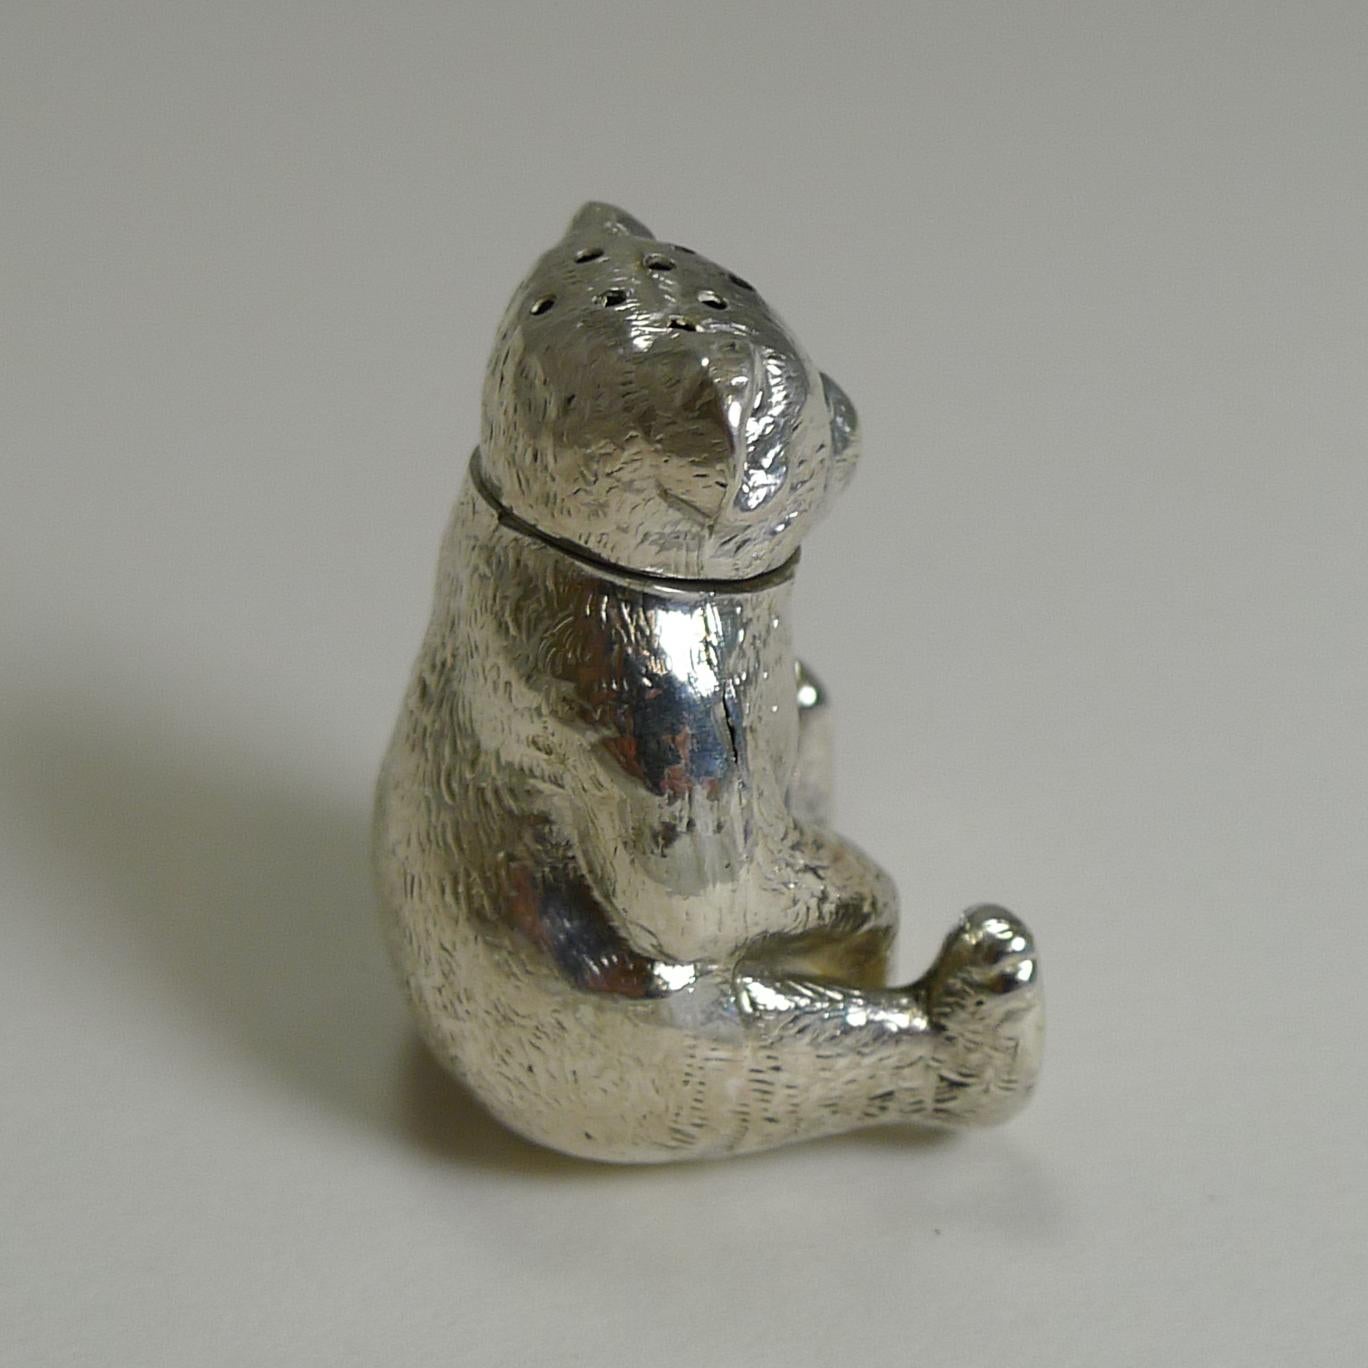 Early 20th Century Small English Edwardian Sterling Silver Teddy Bear Pepperette / Pepper Pot